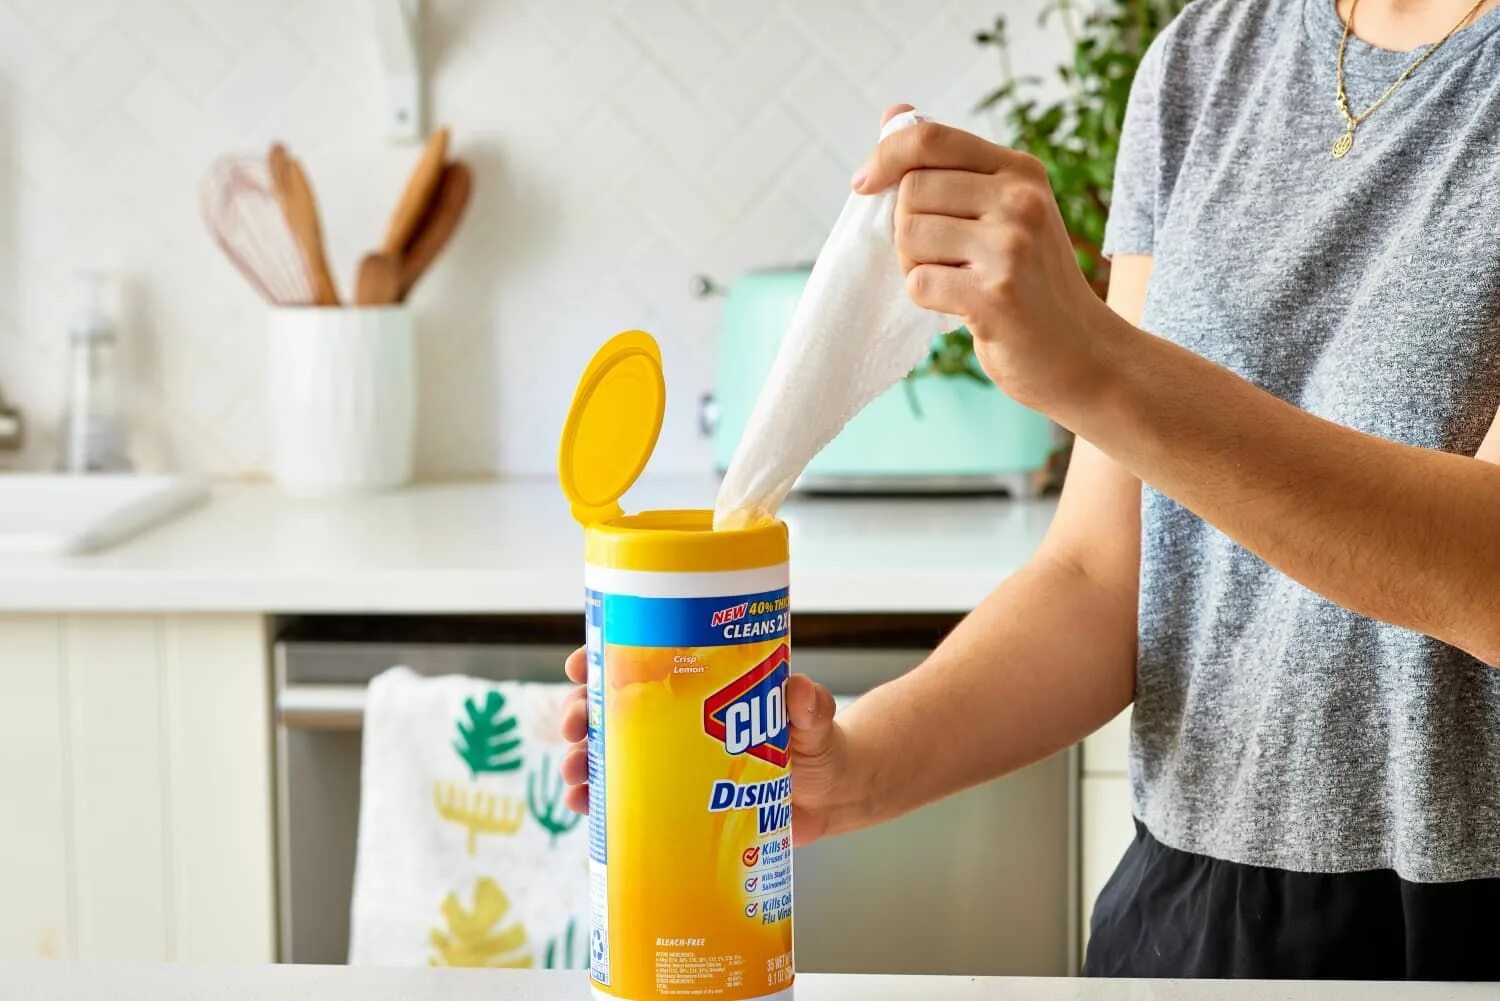 Cleaning wipes. Clorox салфетки. Cleaning wipes салфетки. Cleaning Multi - surface wipes.